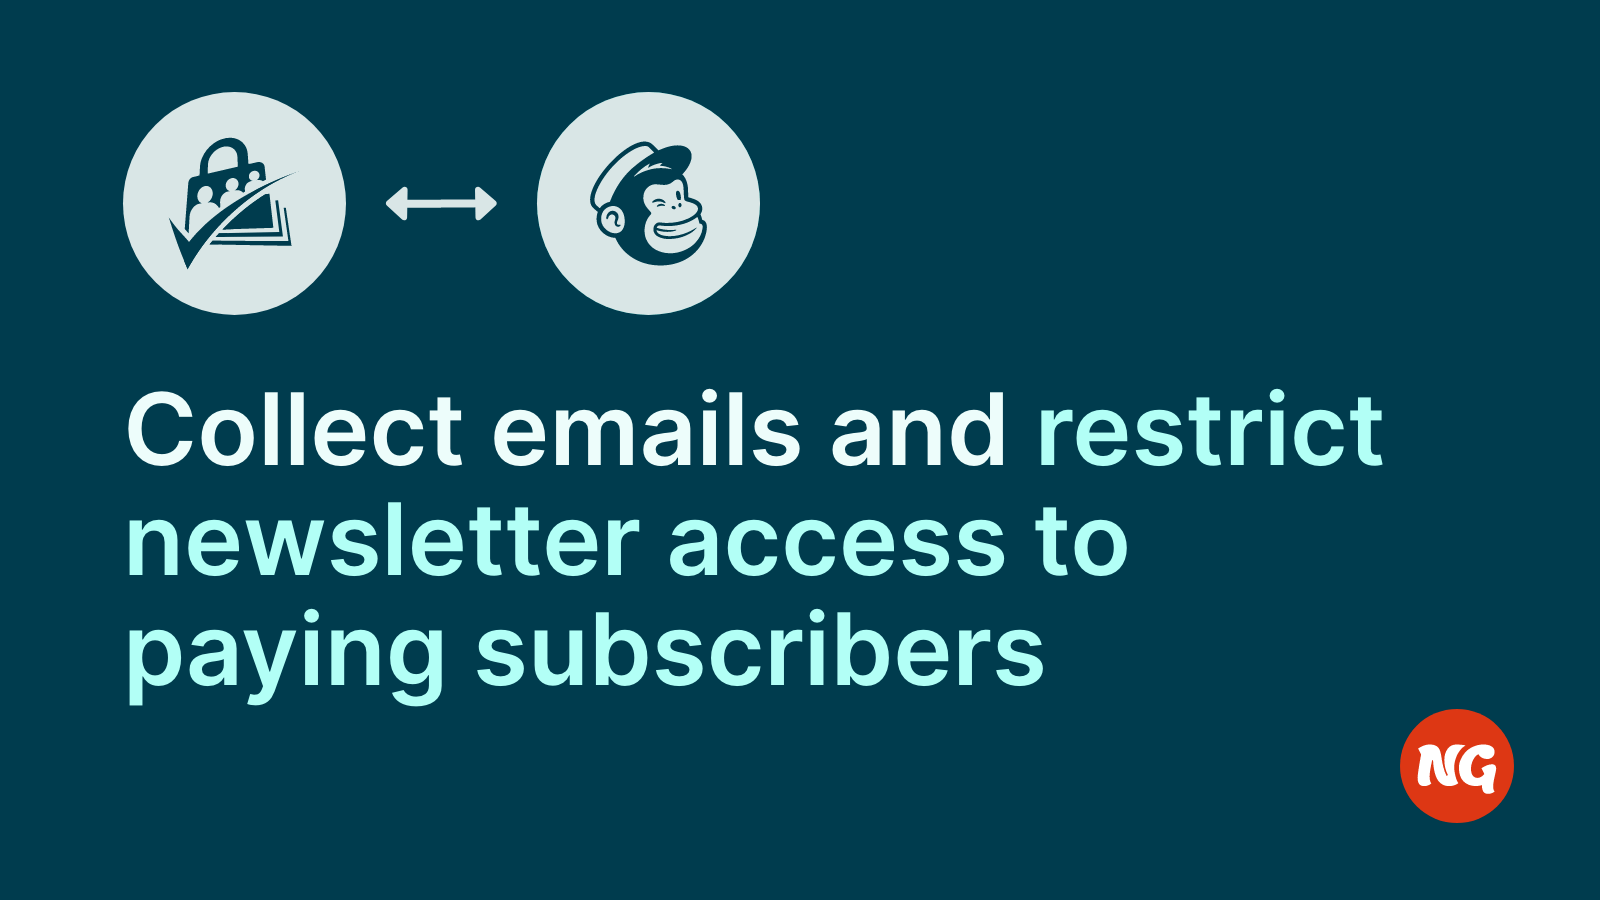 Collect emails and restrict newsletters to paying subscribers